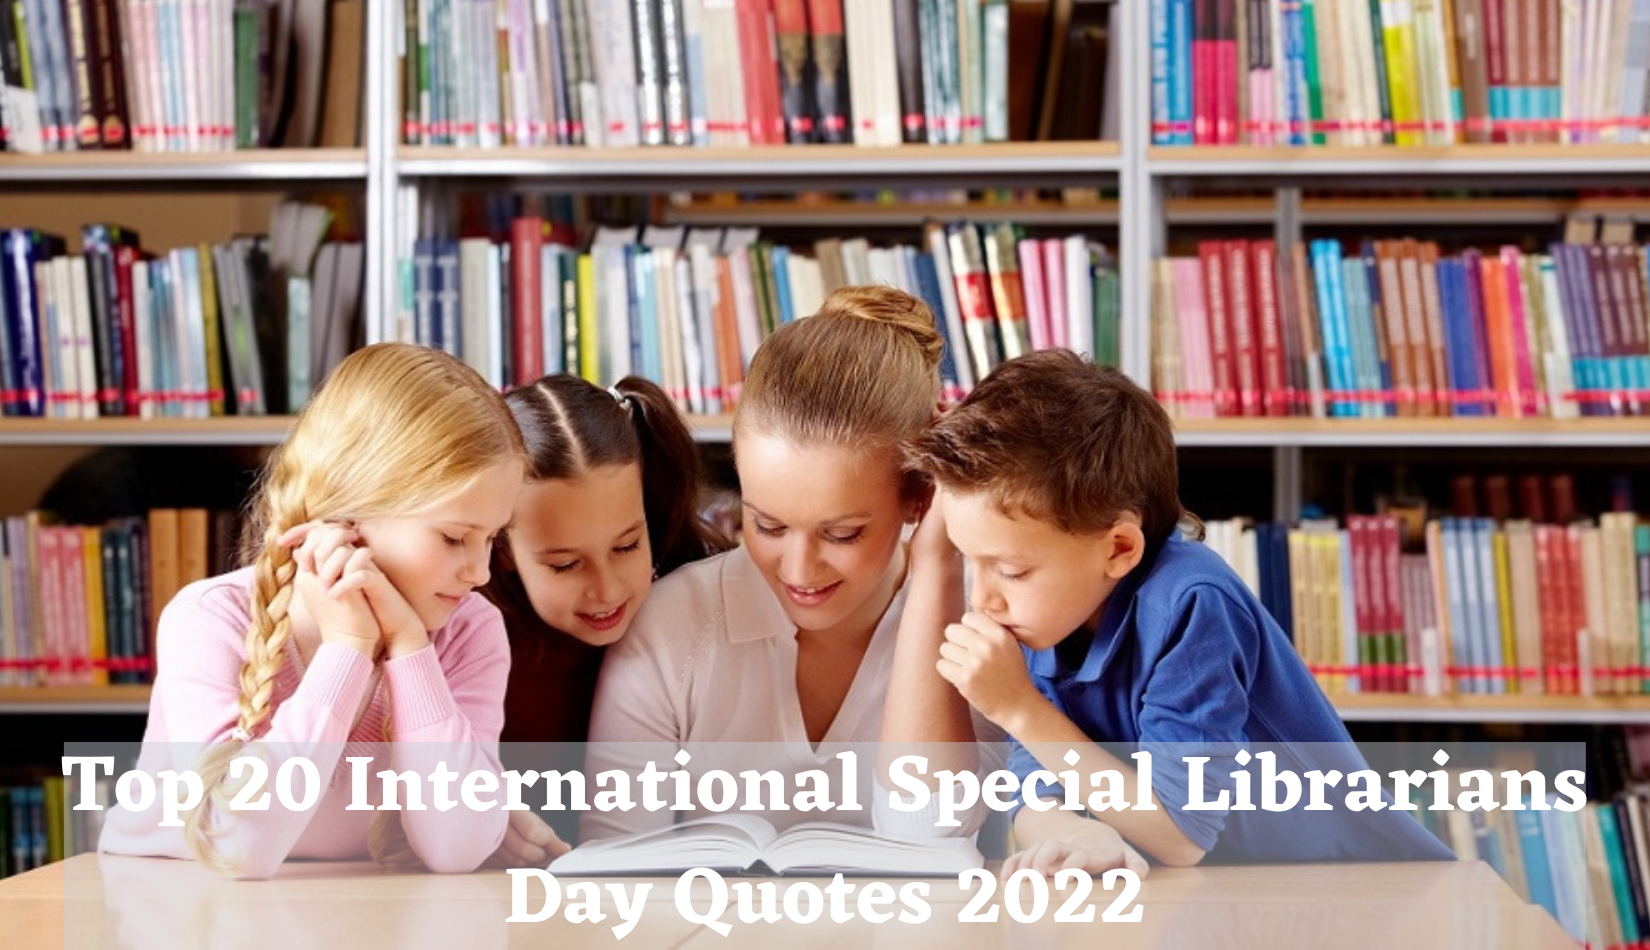 International Special Librarians Day Quotes